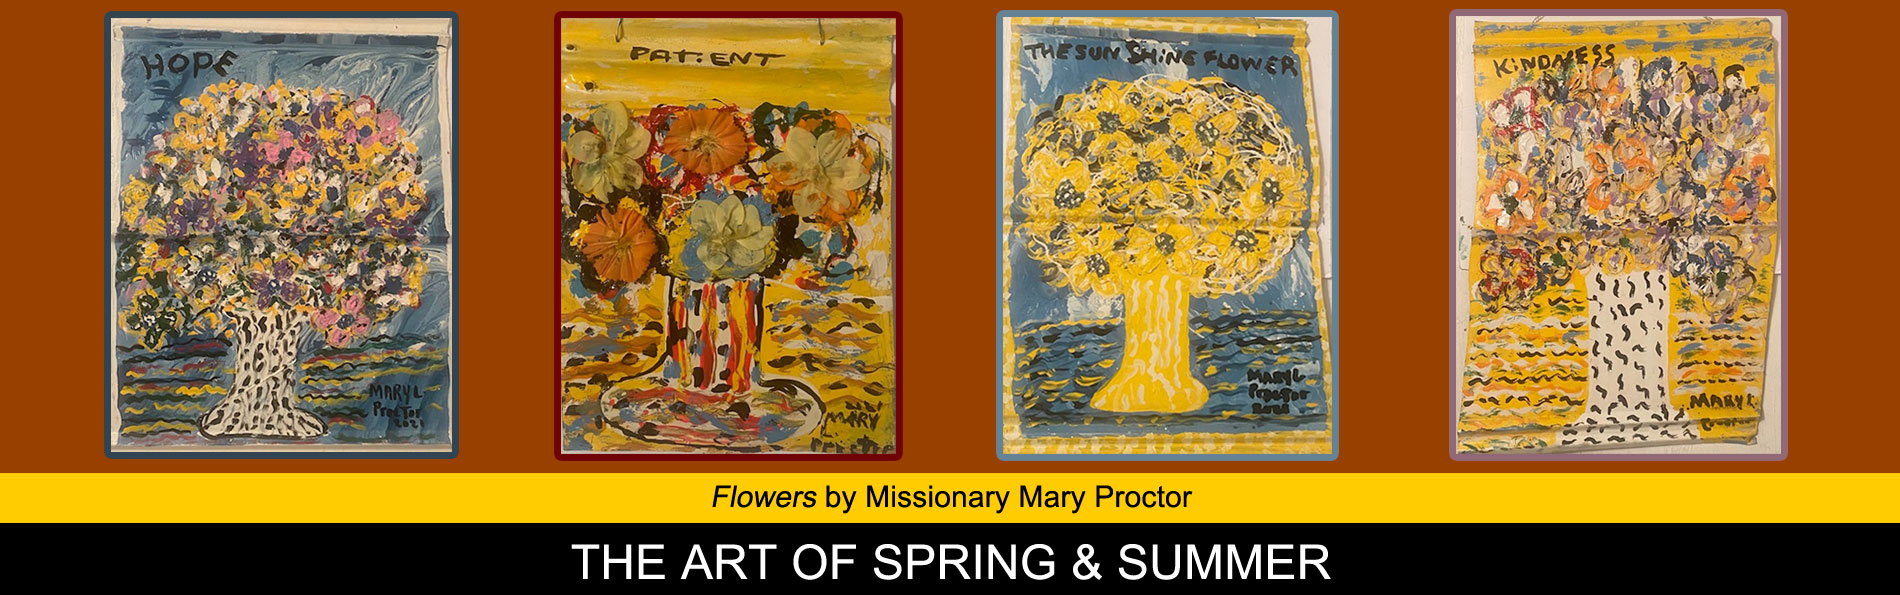 Flowers by Missionary Mary Proctor